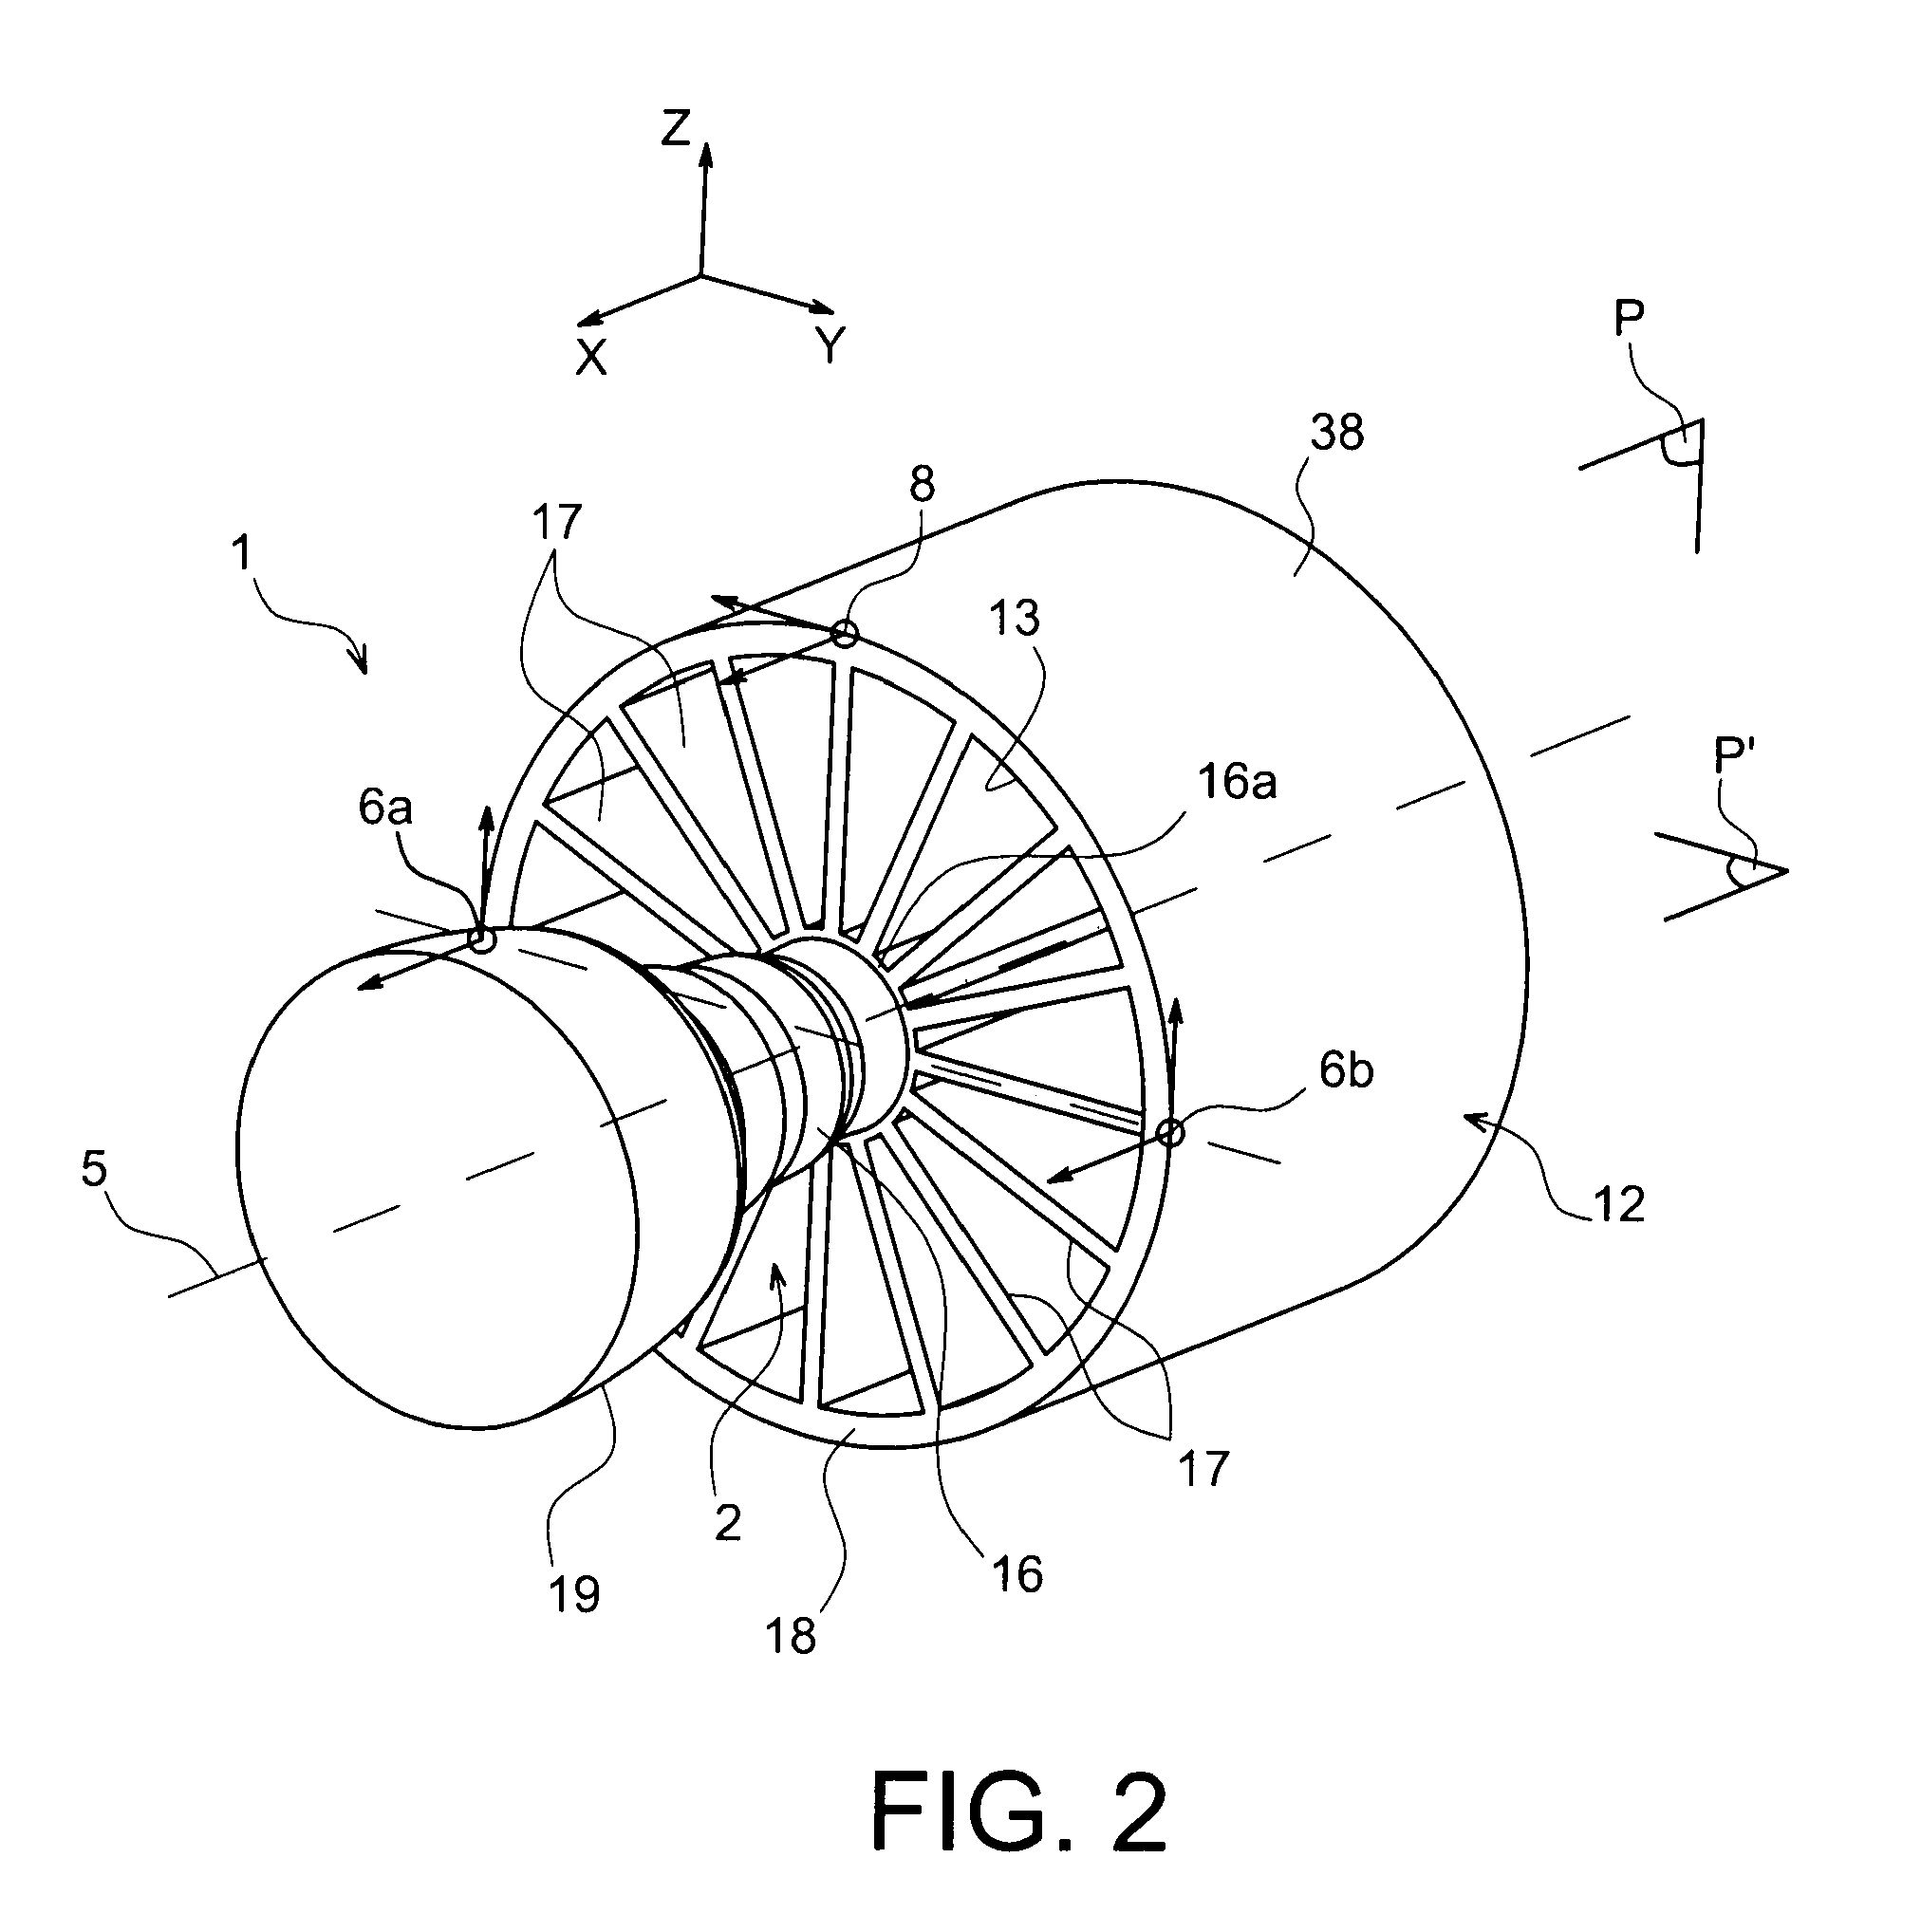 Engine assembly for aircraft with sliding nacelle